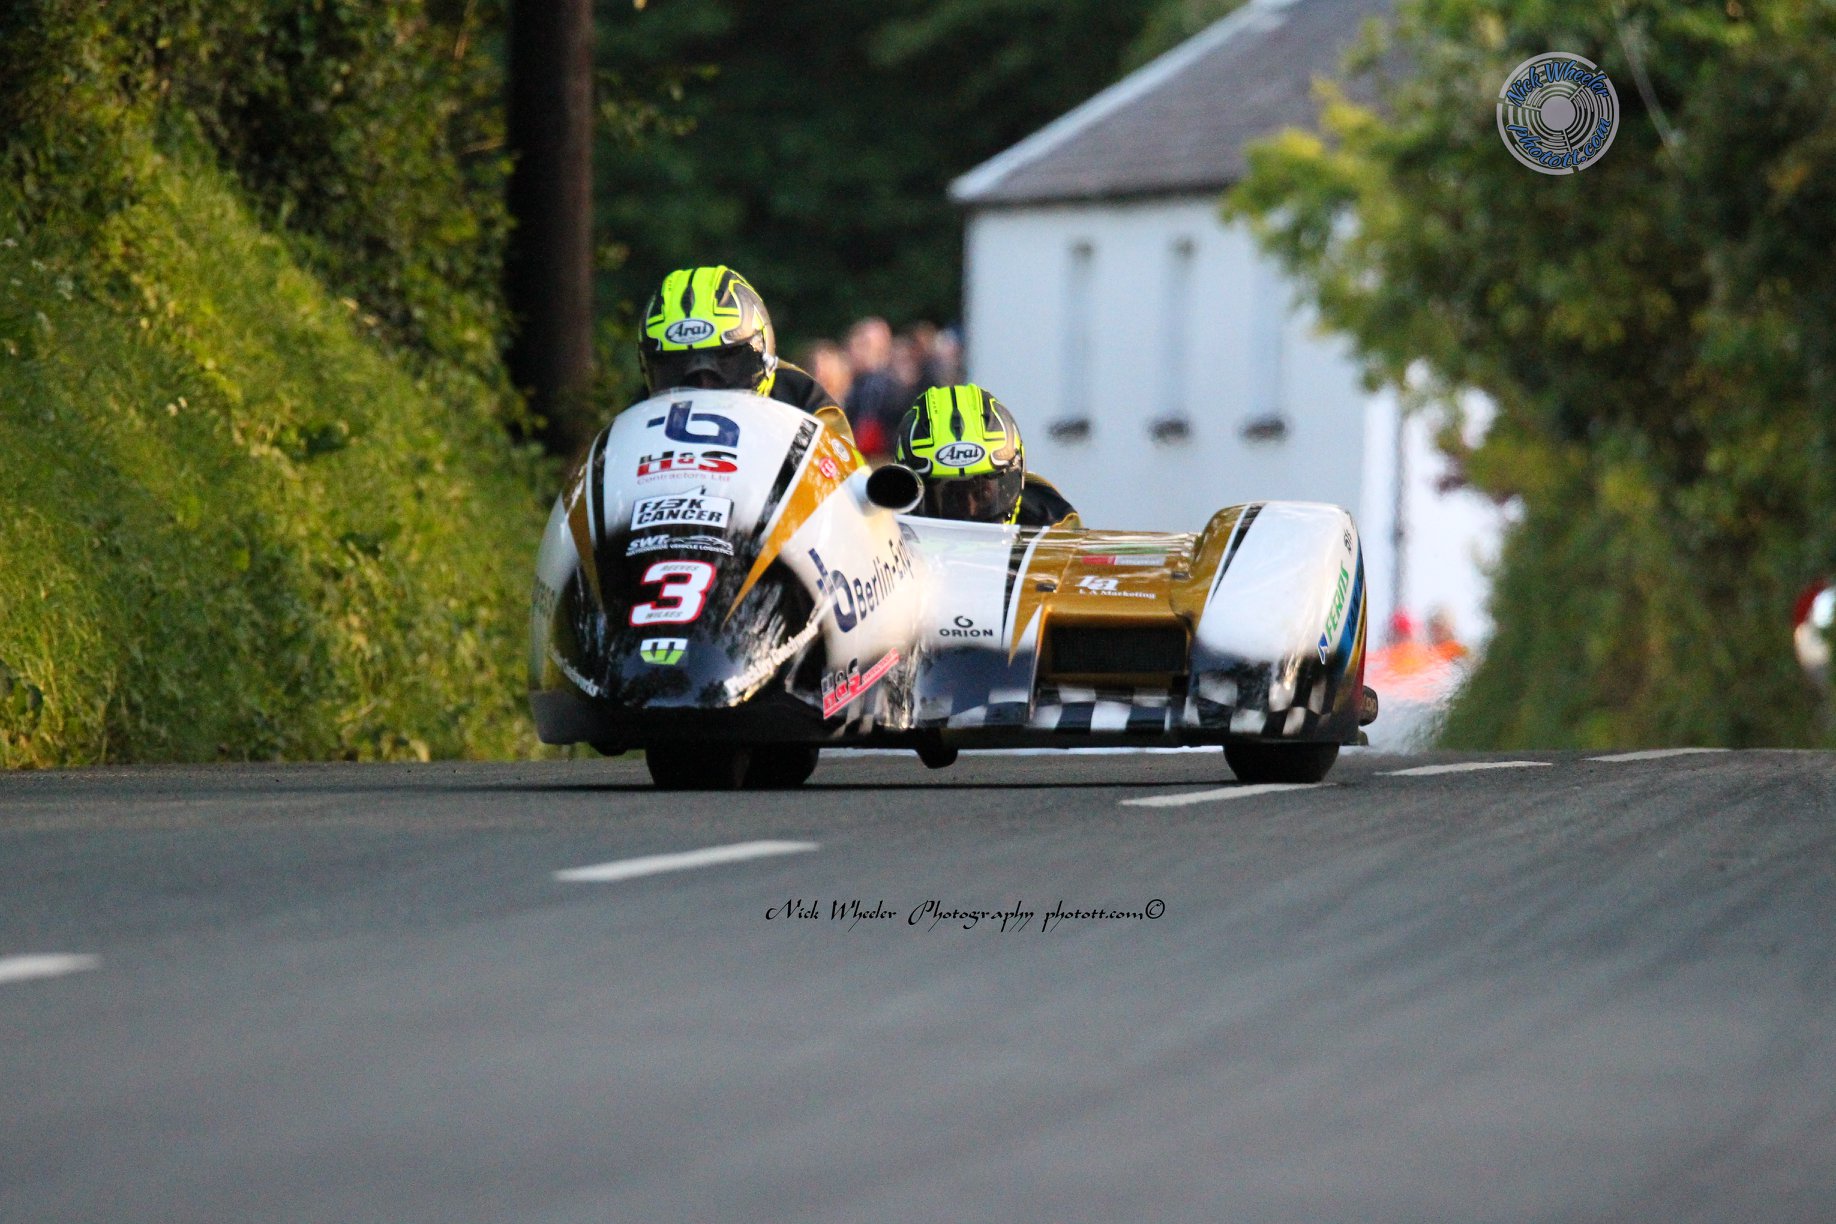 TT Front Runners Reeves/Wilkes Crowned 2019 Sidecar World Championship Winners